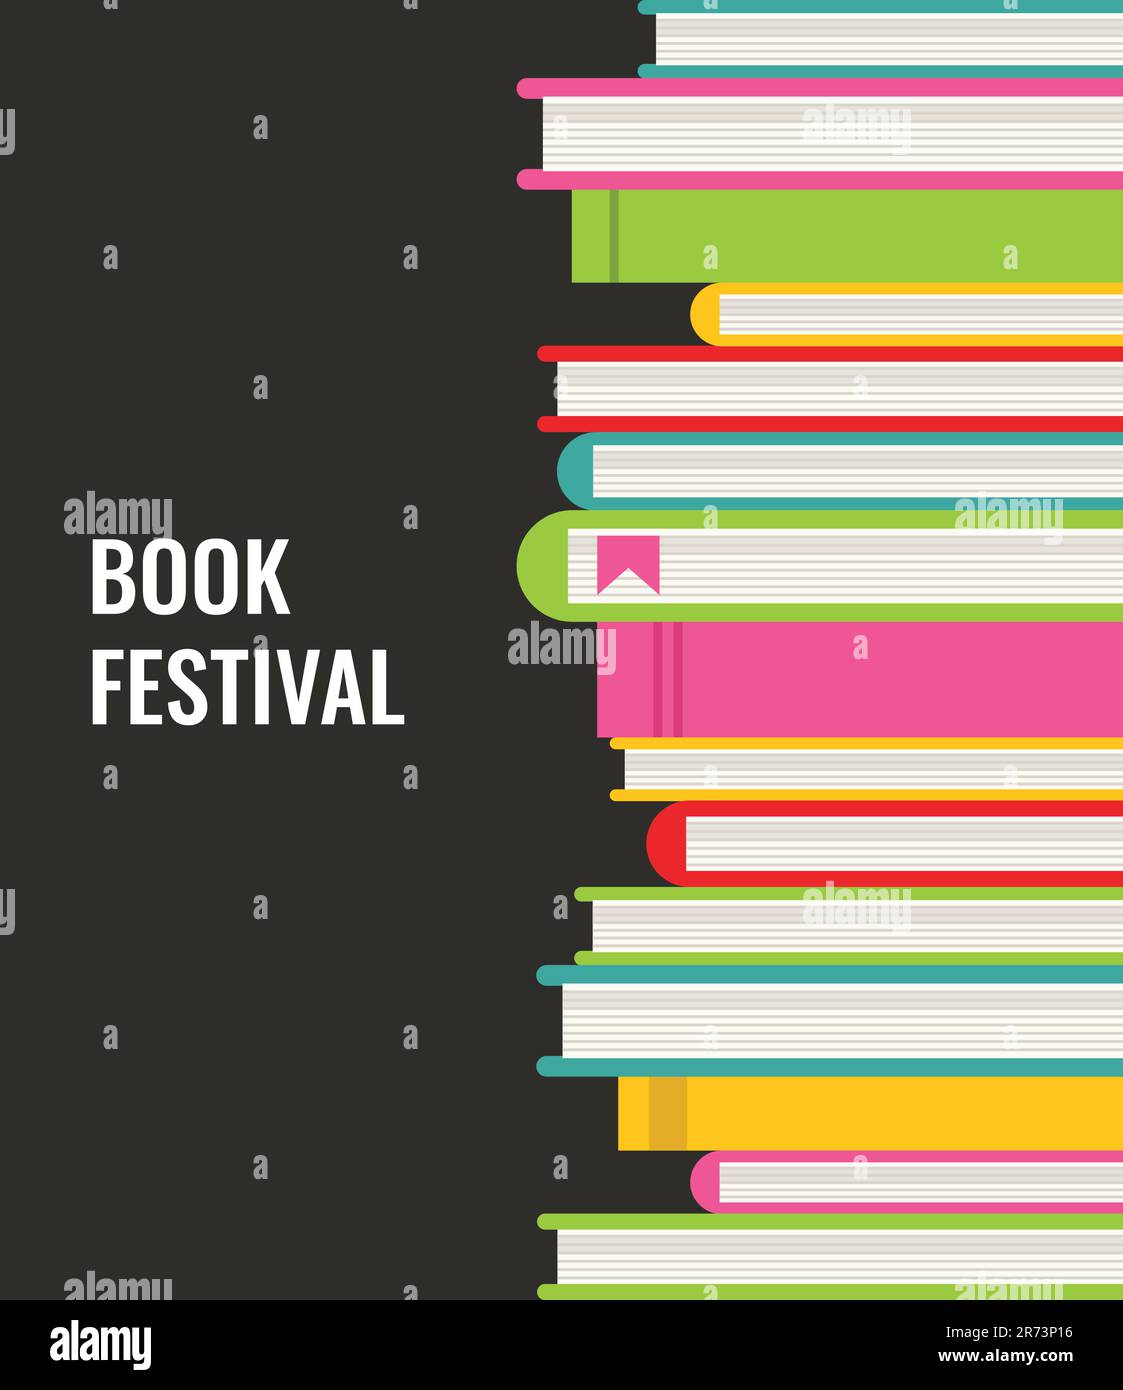 Book festival vector background with colorful books. Stack of colorful books on dark background. Stock Vector